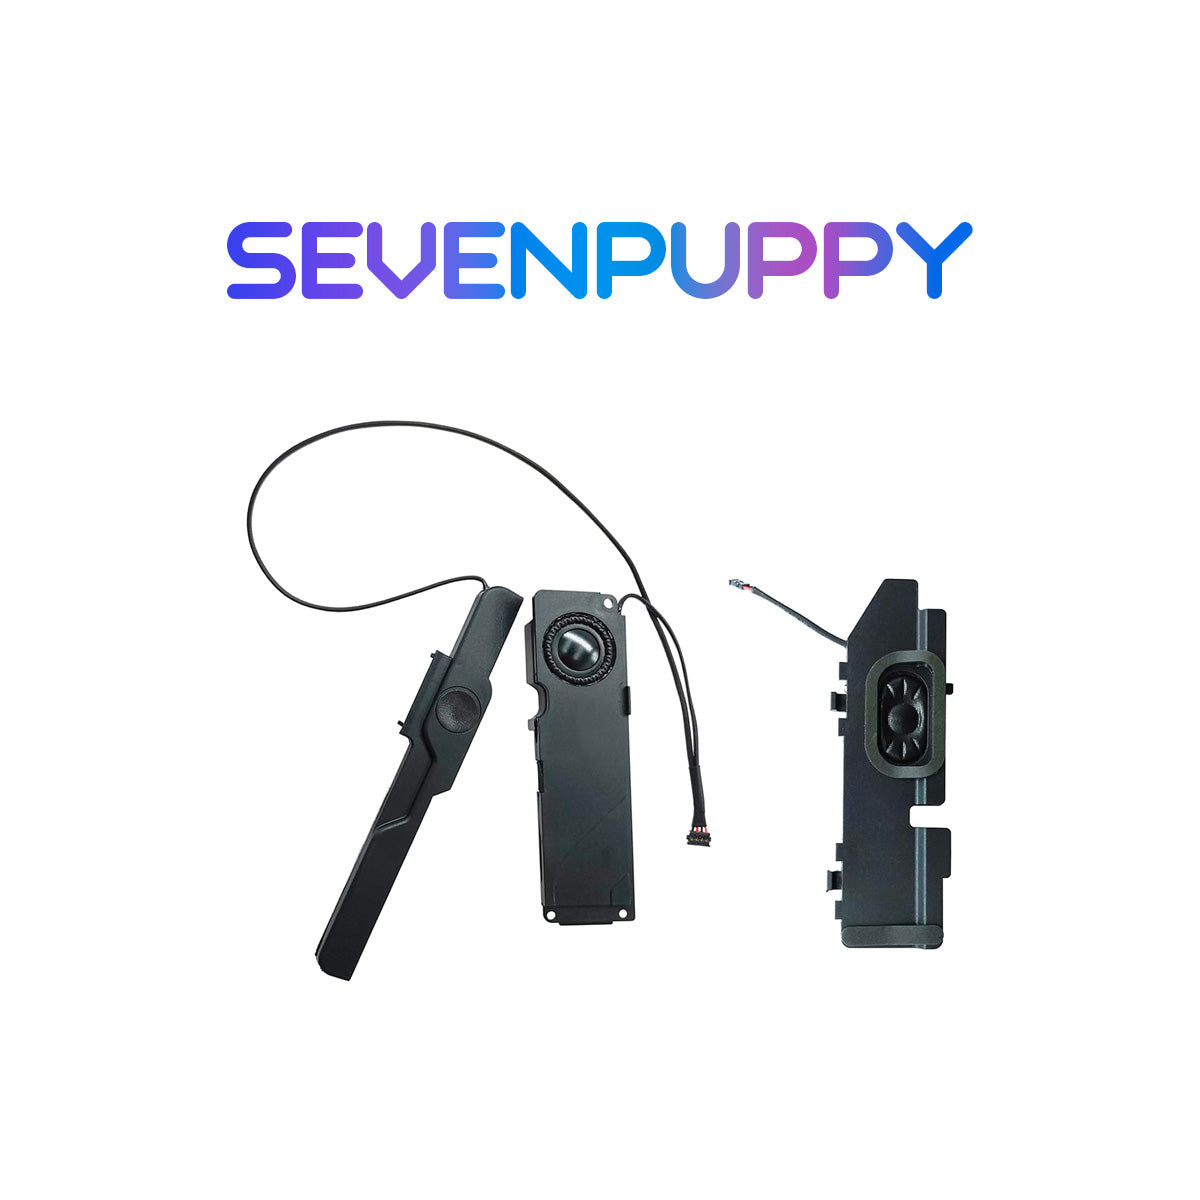 SEVEN PUPPY Brand NEW Left and Right Speaker Set Pair For Macbook Pro 13" A1278 2009-2012 Year Internal Speaker